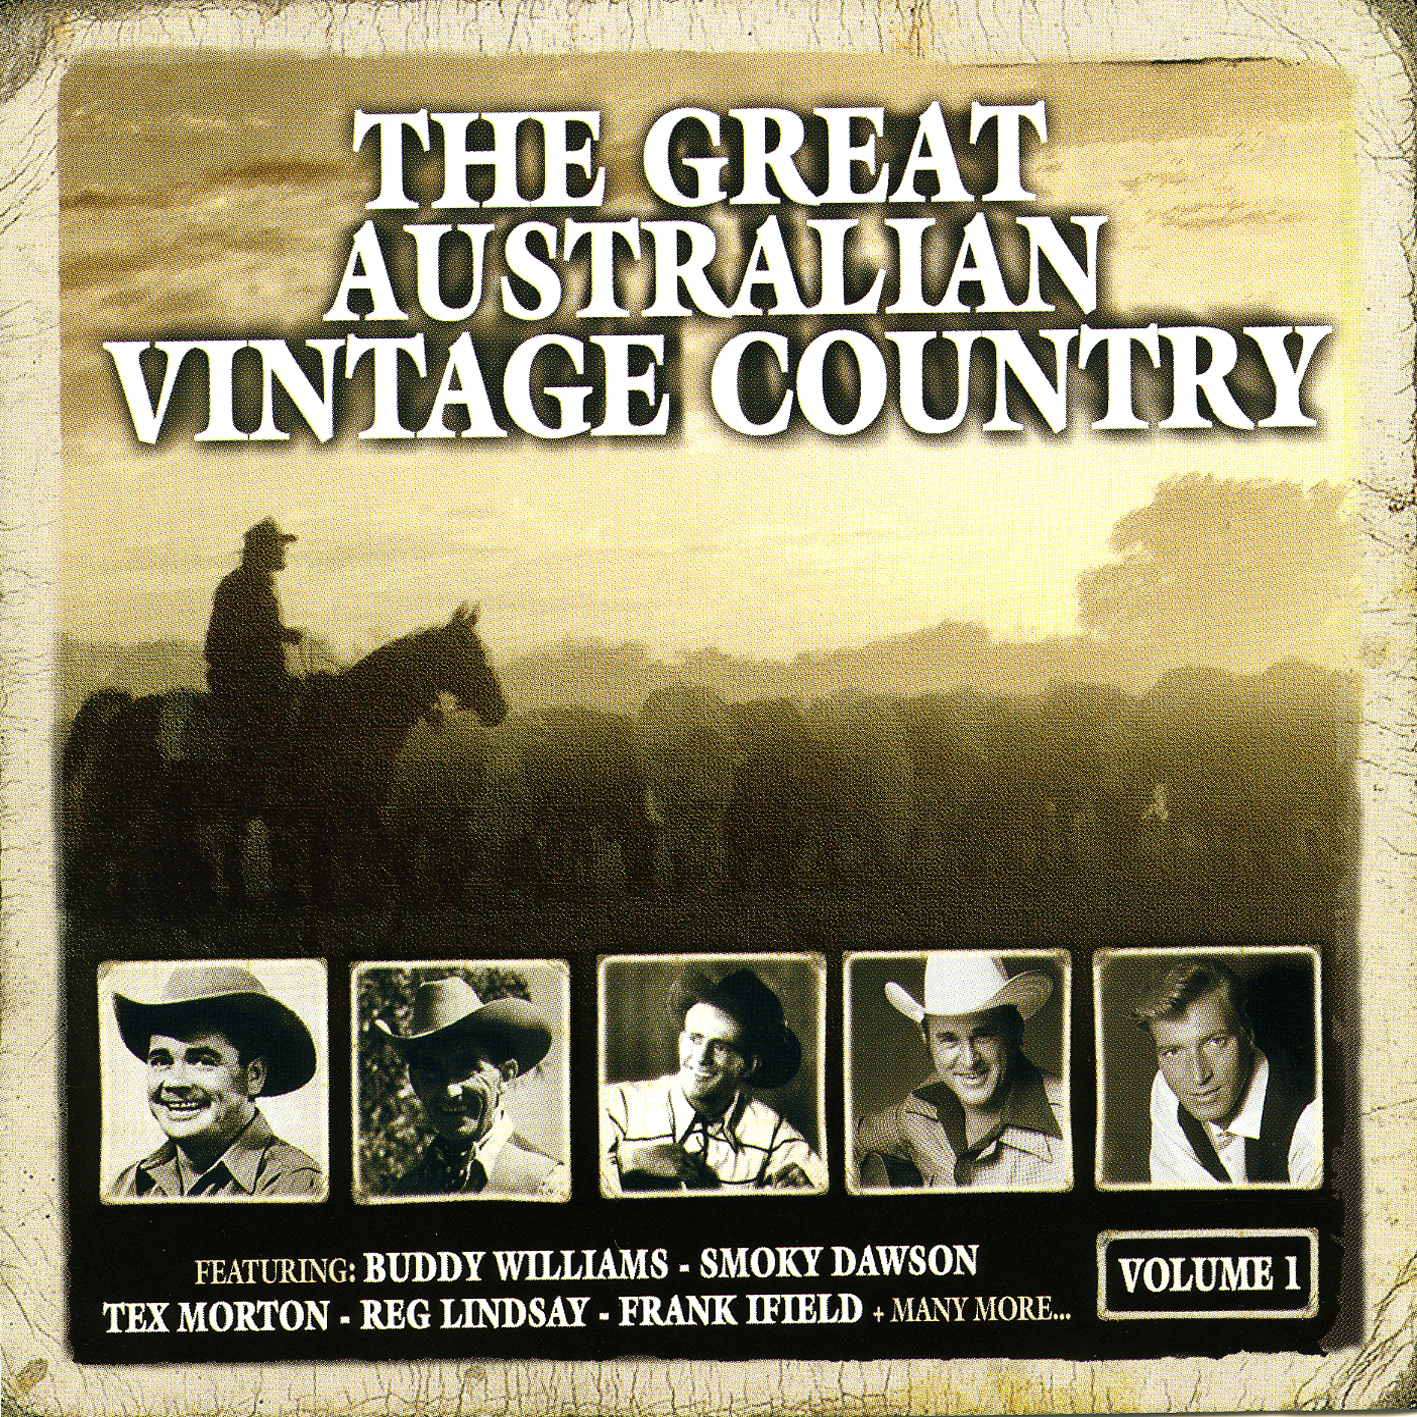 The Great Australian Vintage Country Volume One